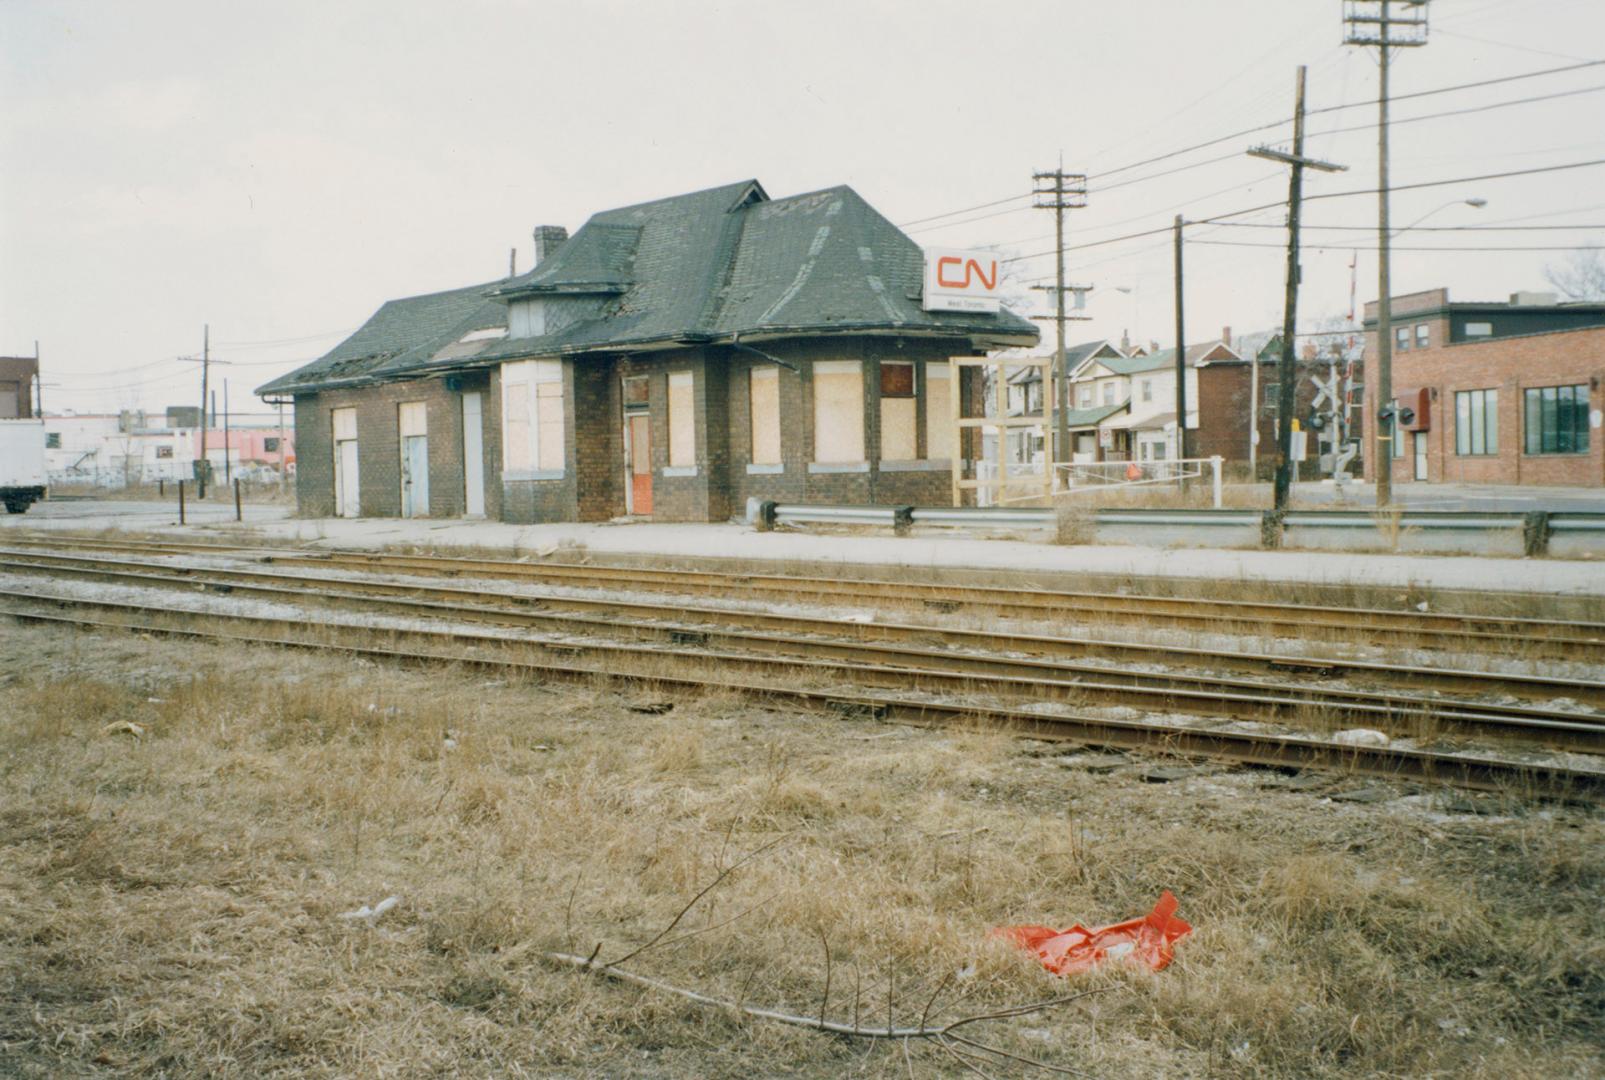 West Toronto Railway Station (Canadian National Railway), Old Weston Road, west side, south of Davenport Road, Toronto, Ontario